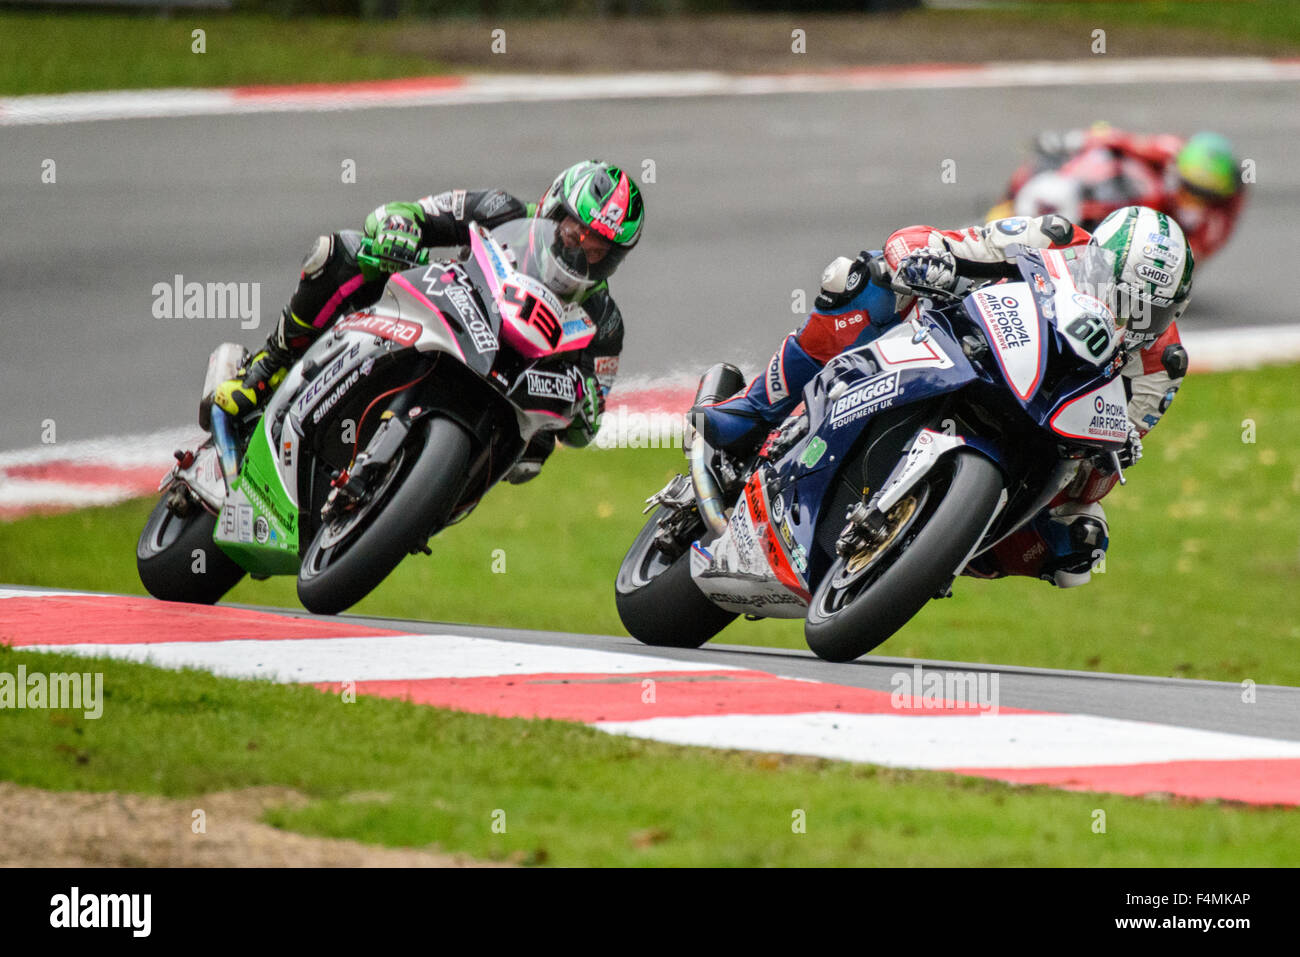 Riders battle it out on the GP circuit in the final round of the British Super Bike Championships at Brands Hatch. Stock Photo